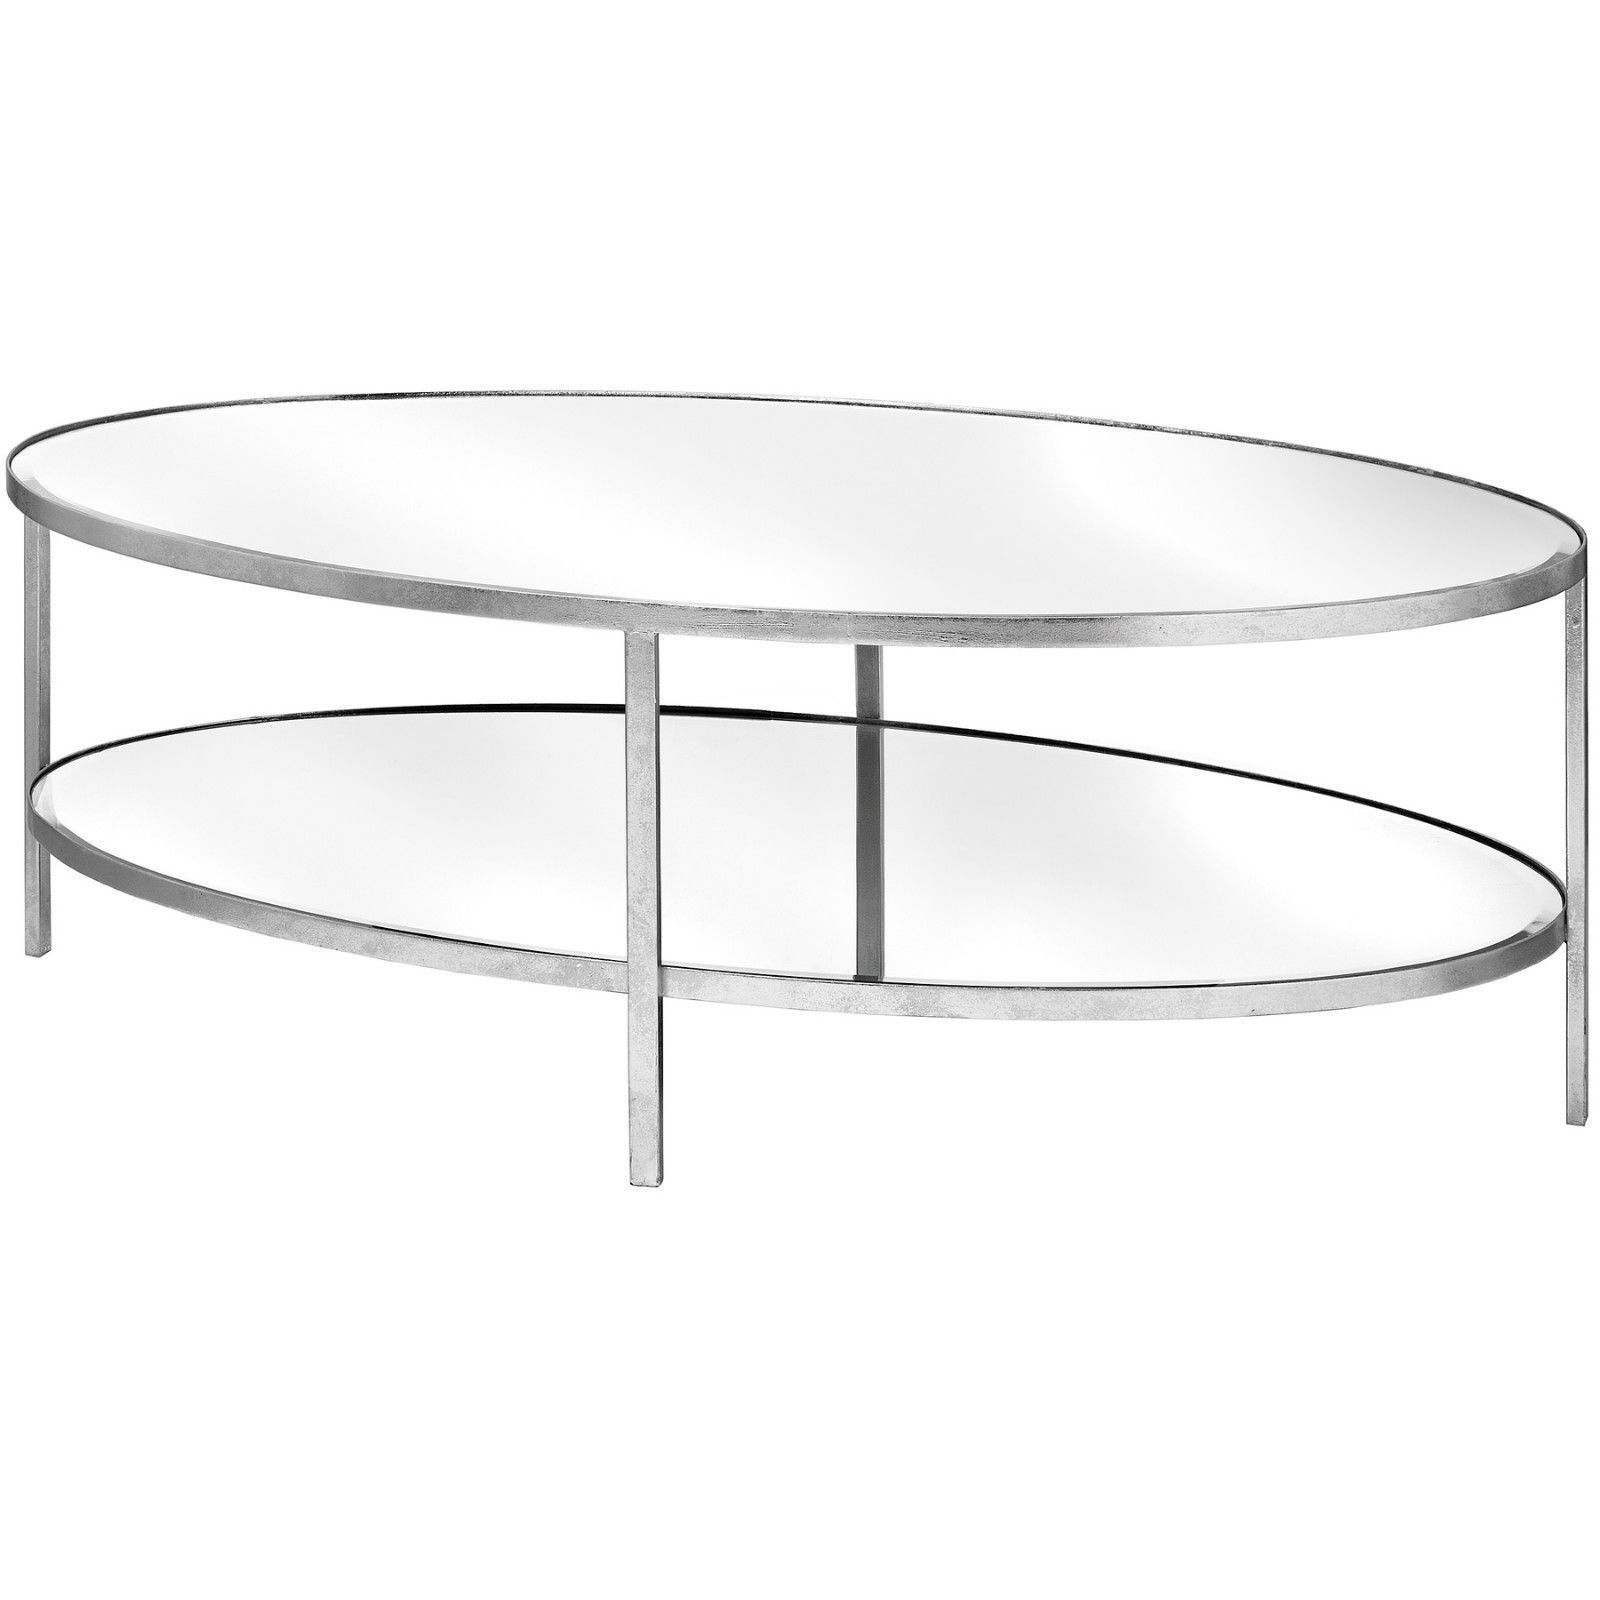 2019 Glass And Gold Oval Coffee Tables Intended For Contemporary Silver Mirrored Oval Glass Coffee Table With (Gallery 19 of 20)